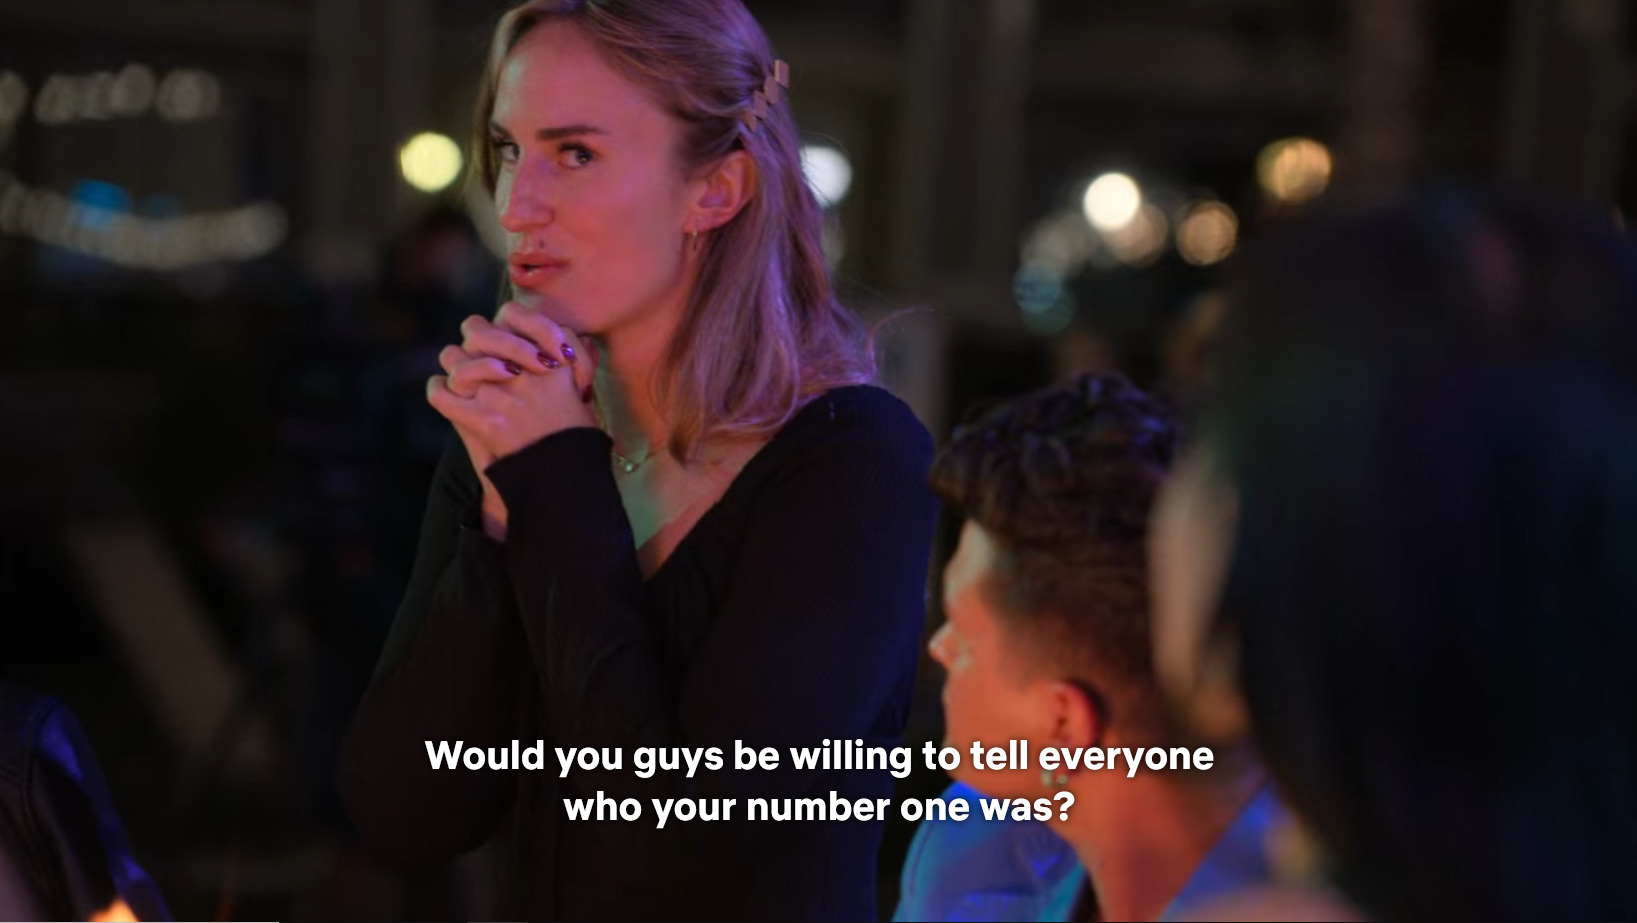 Vanessa clasps her hands in front of her face and asks, "Would you guys be willing to tell everyone who your number one was?"